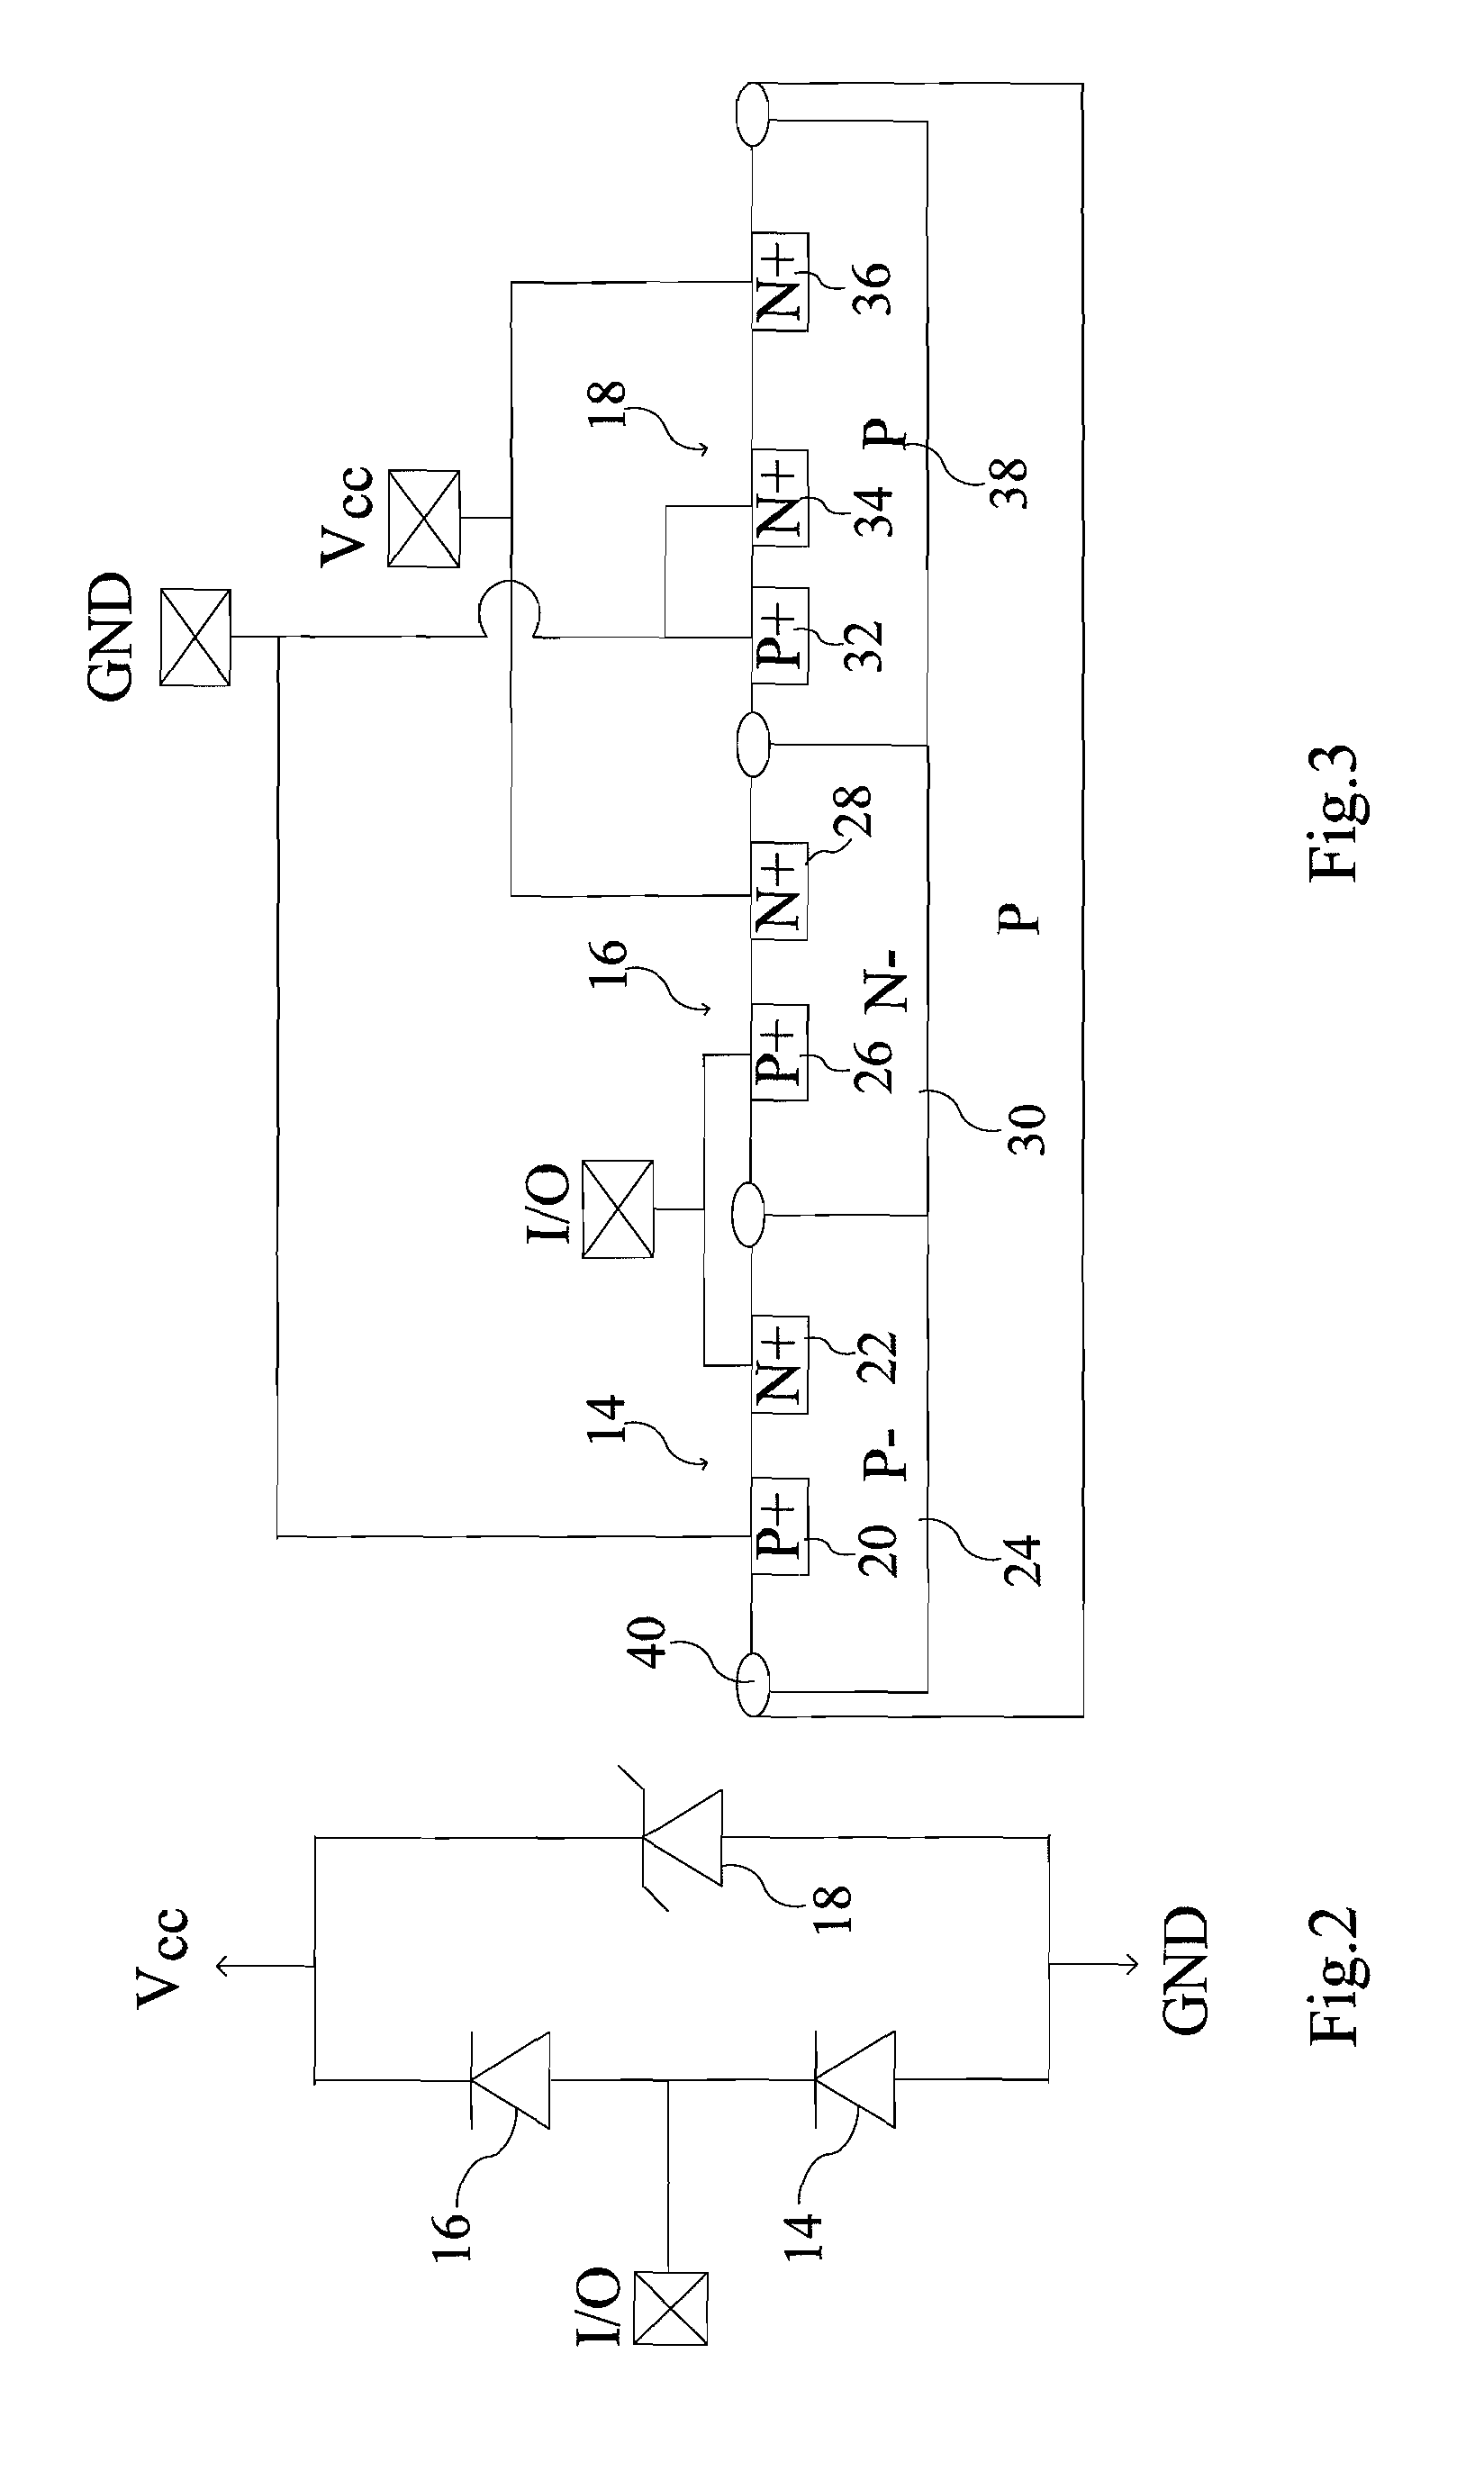 Lateral transient voltage suppressor with ultra low capacitance